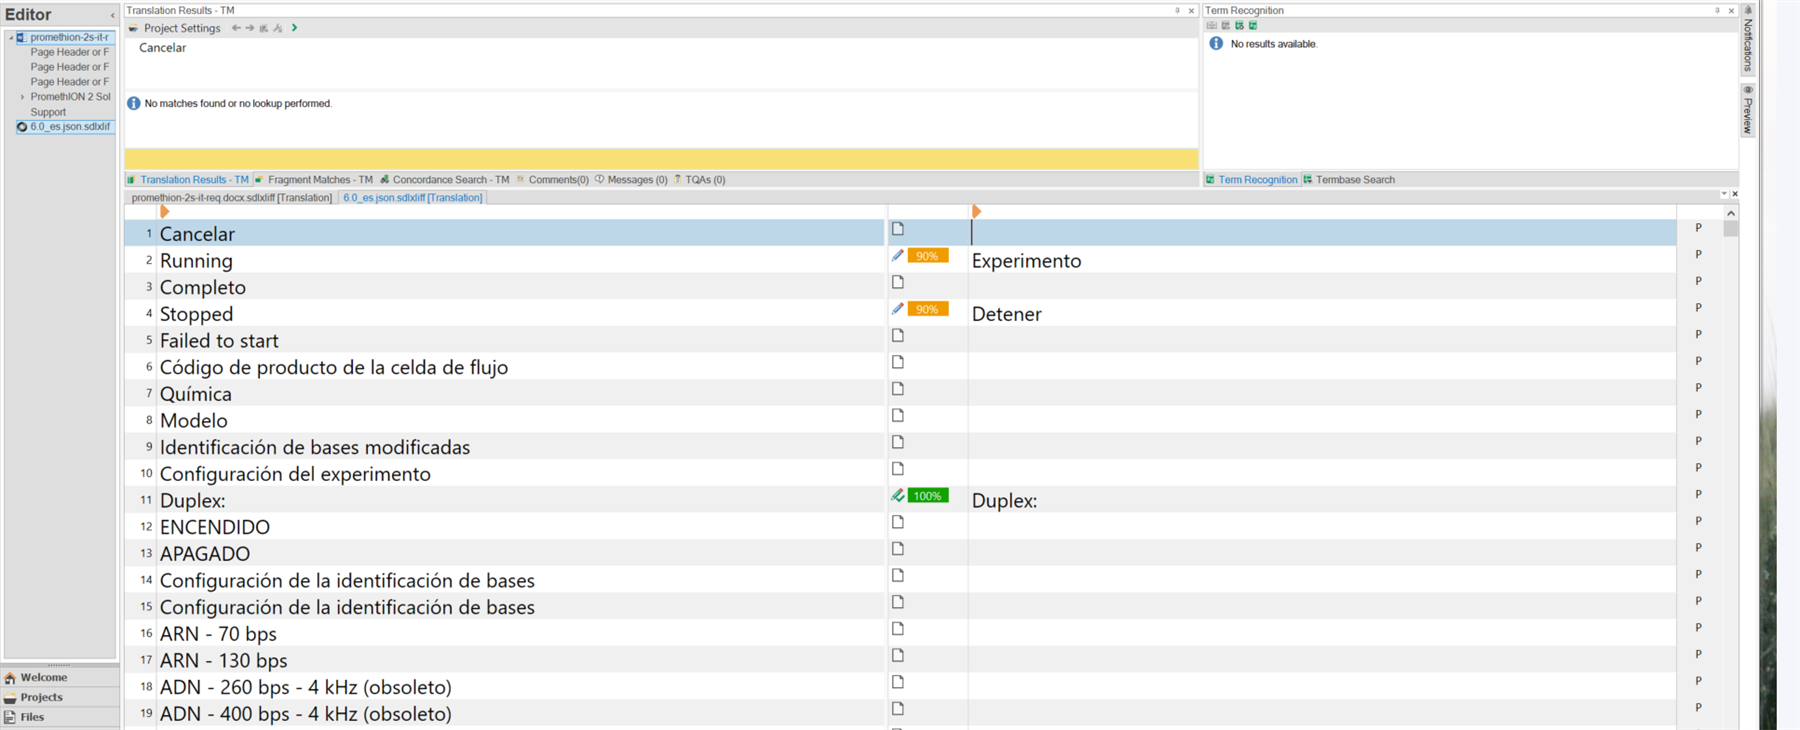 Trados Studio editor window showing a list of Spanish terms and their corresponding translation progress indicators, with terms like 'Cancelar', 'Running', and 'Completo'.